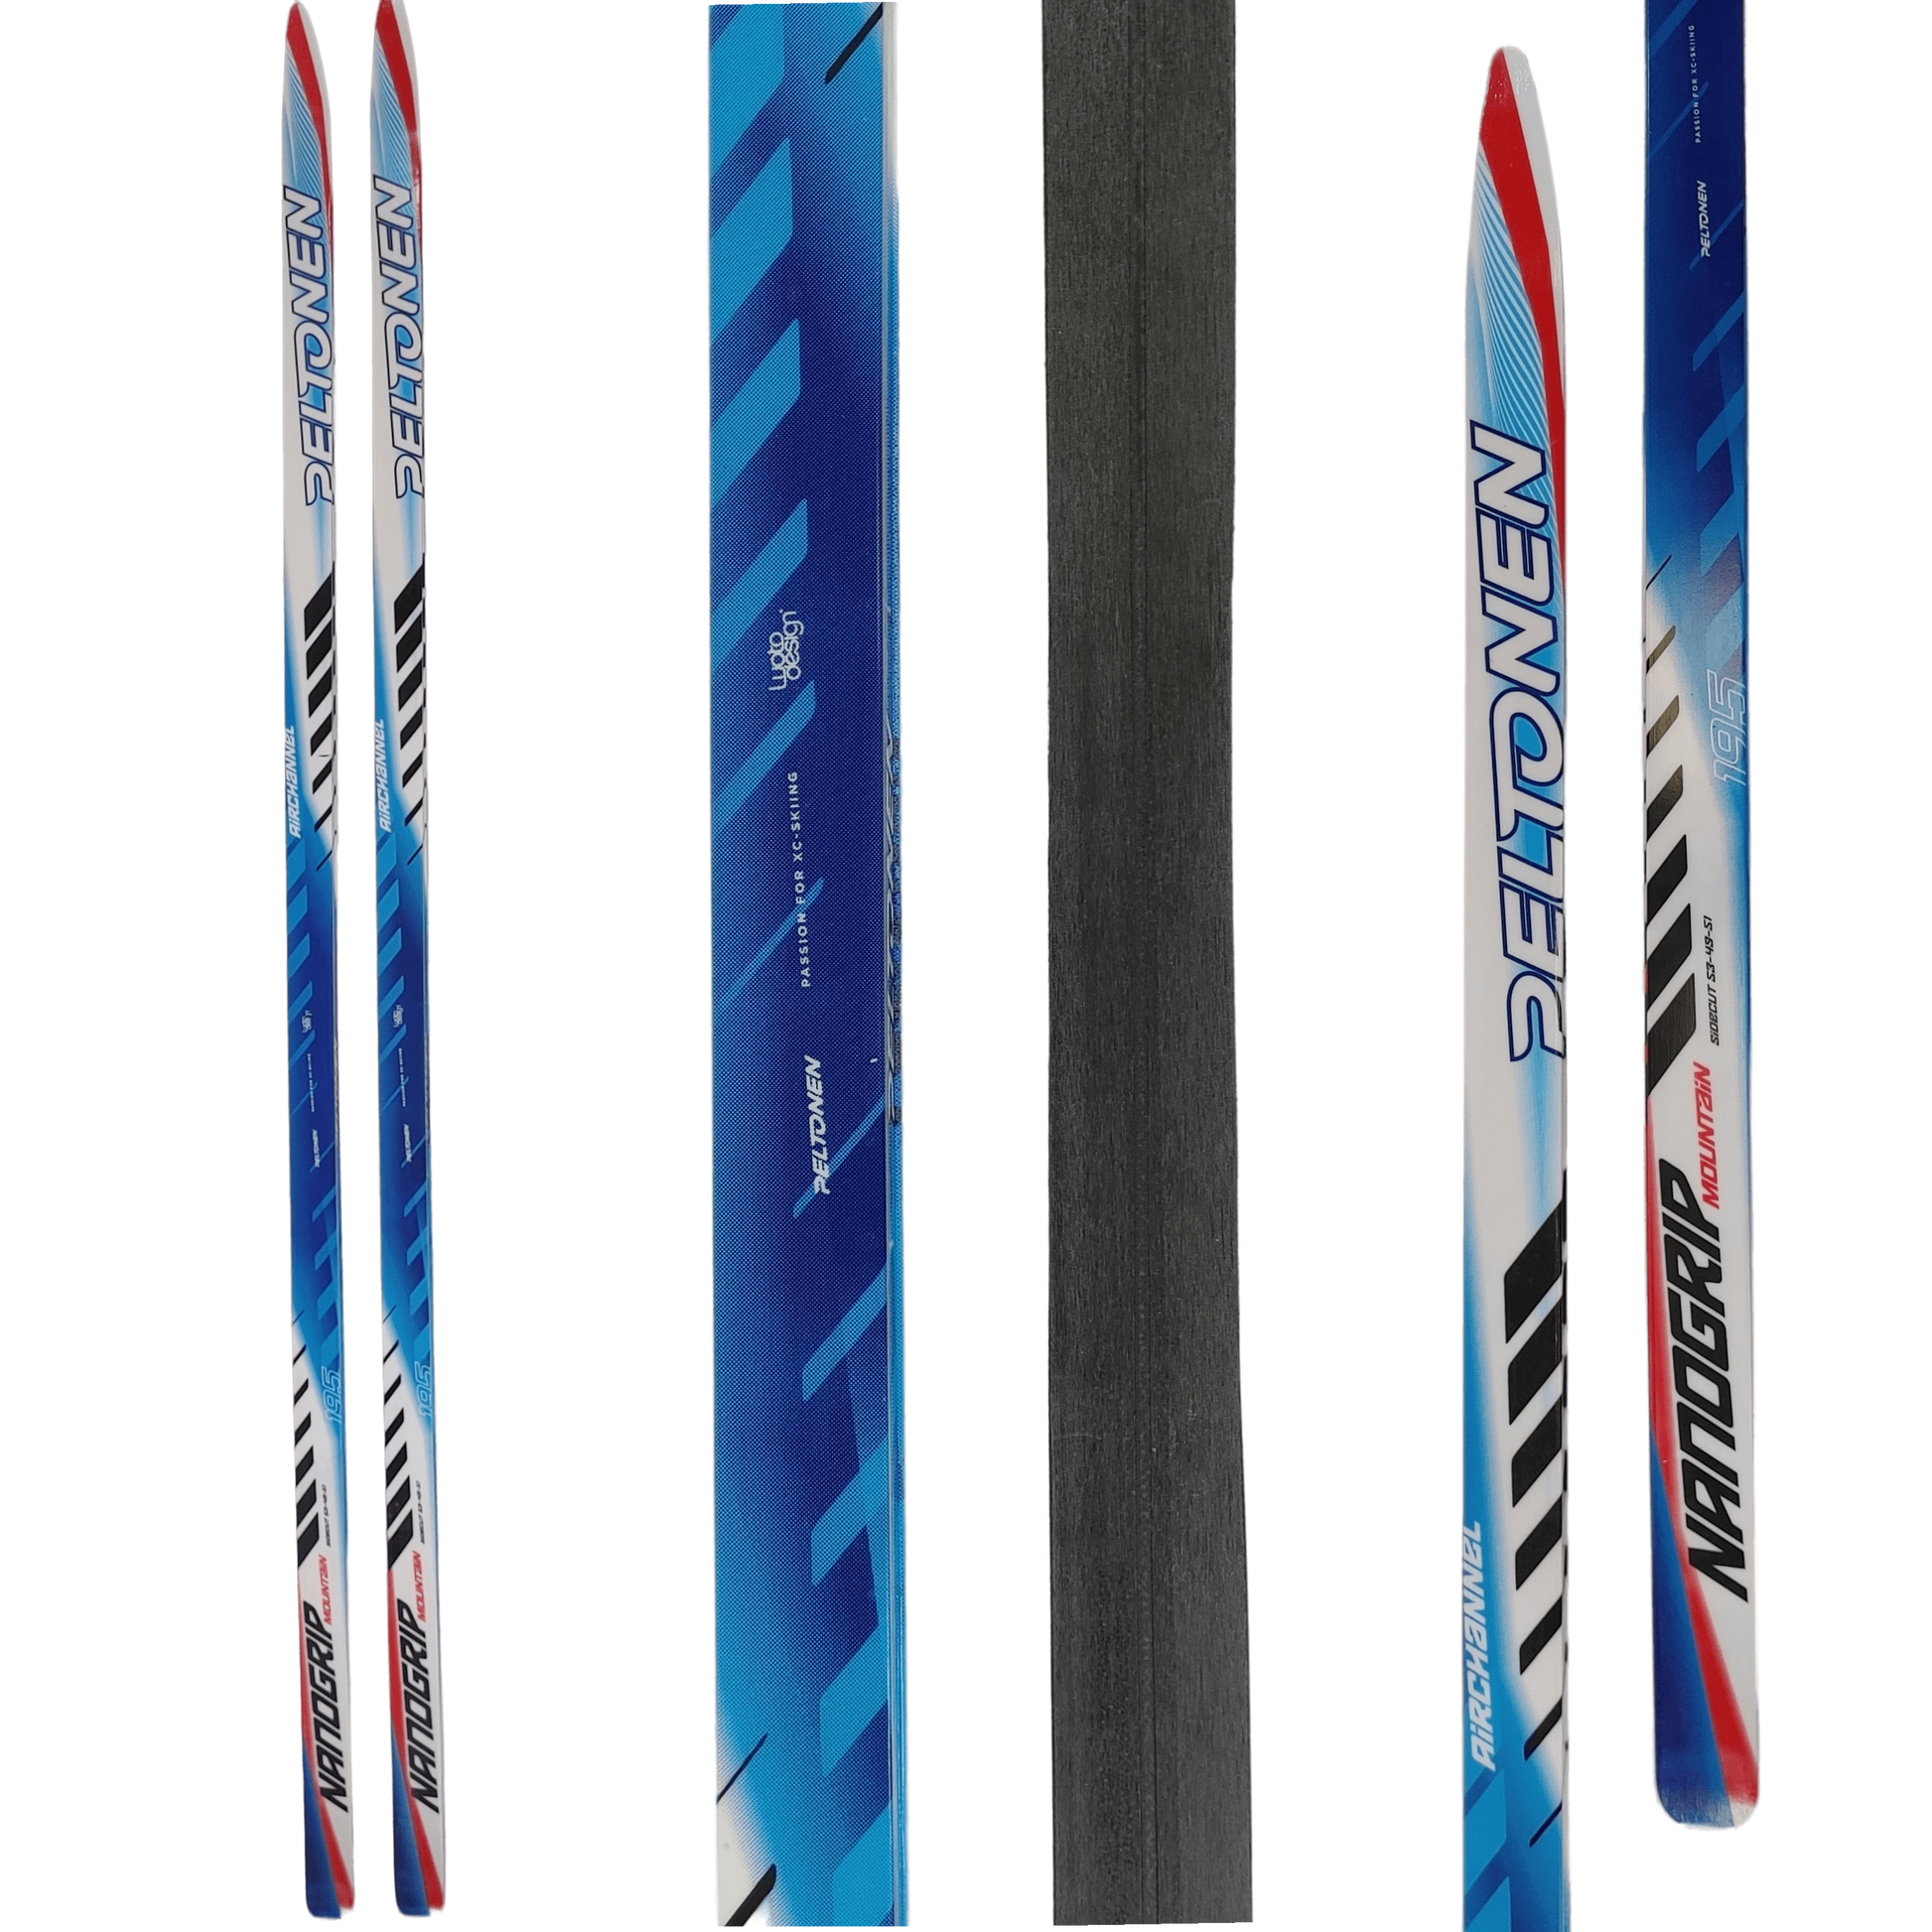 A product picture of the Peltonen Mountain Off-Track Classic NANOGRIP 2016 Skis 53-49-51mm Sidecut 